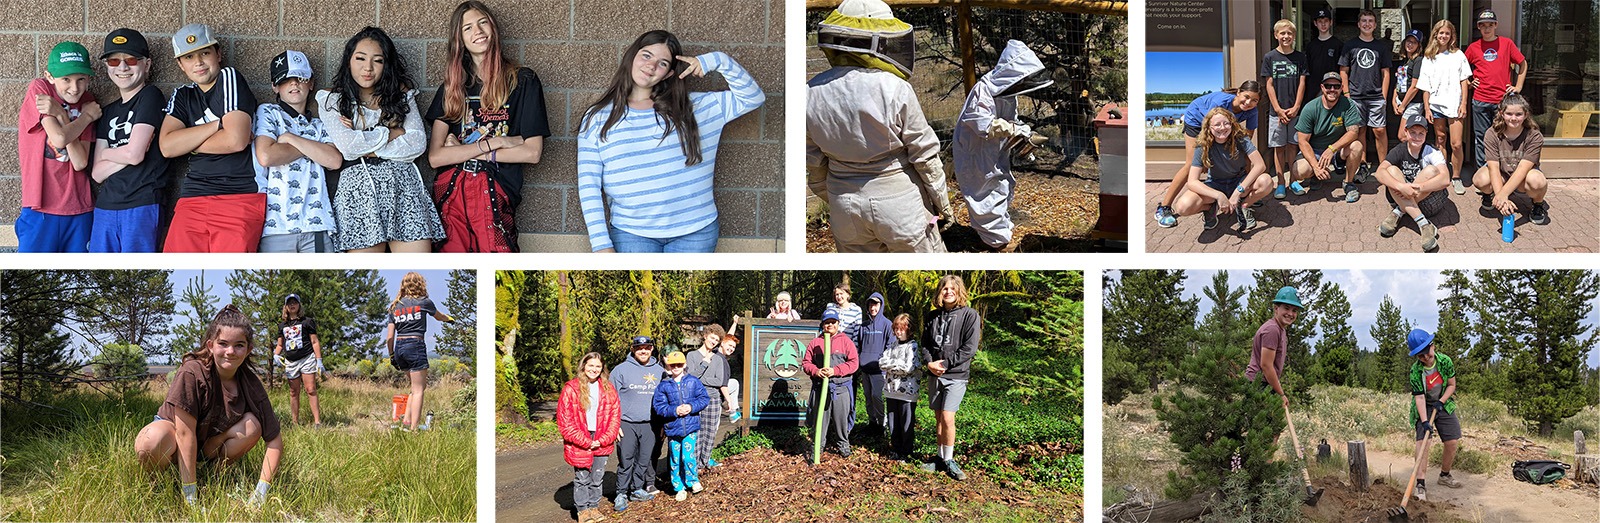 composite of photos of teens at outdoor service projects, including trail maintenance, beekeeping, weeding, and hanging out together